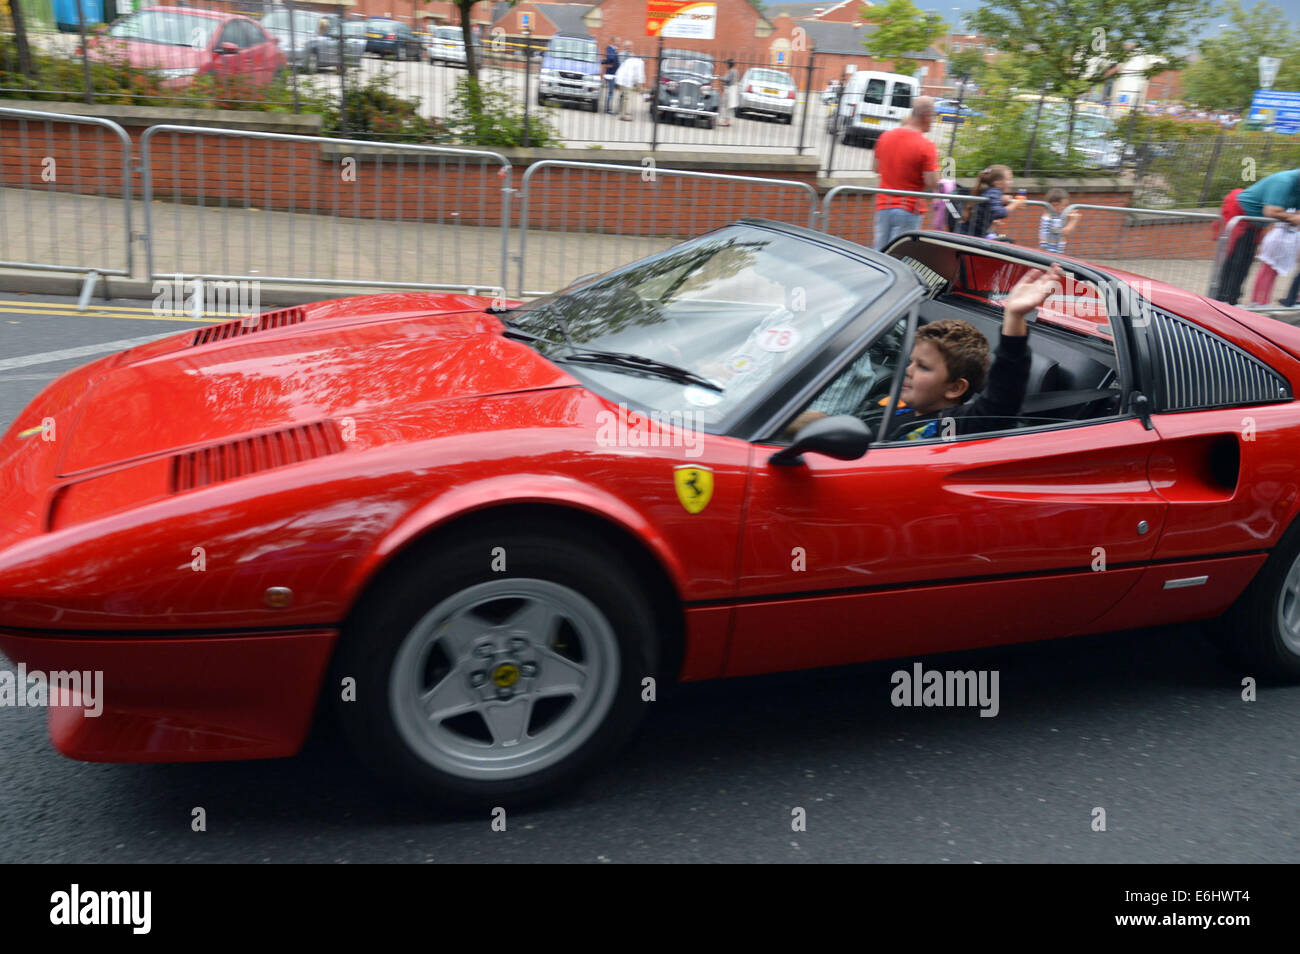 Ormskirk, Lancashire, UK. 24th August, 2014. A vast array of vintage and classic motor vehicles were on display in Ormskirk Town Centre . It was all part of the 3rd Ormskirk Motor Fest onSunday, 24 August, 2014. Credit:  Pak Hung Chan/Alamy Live News Stock Photo